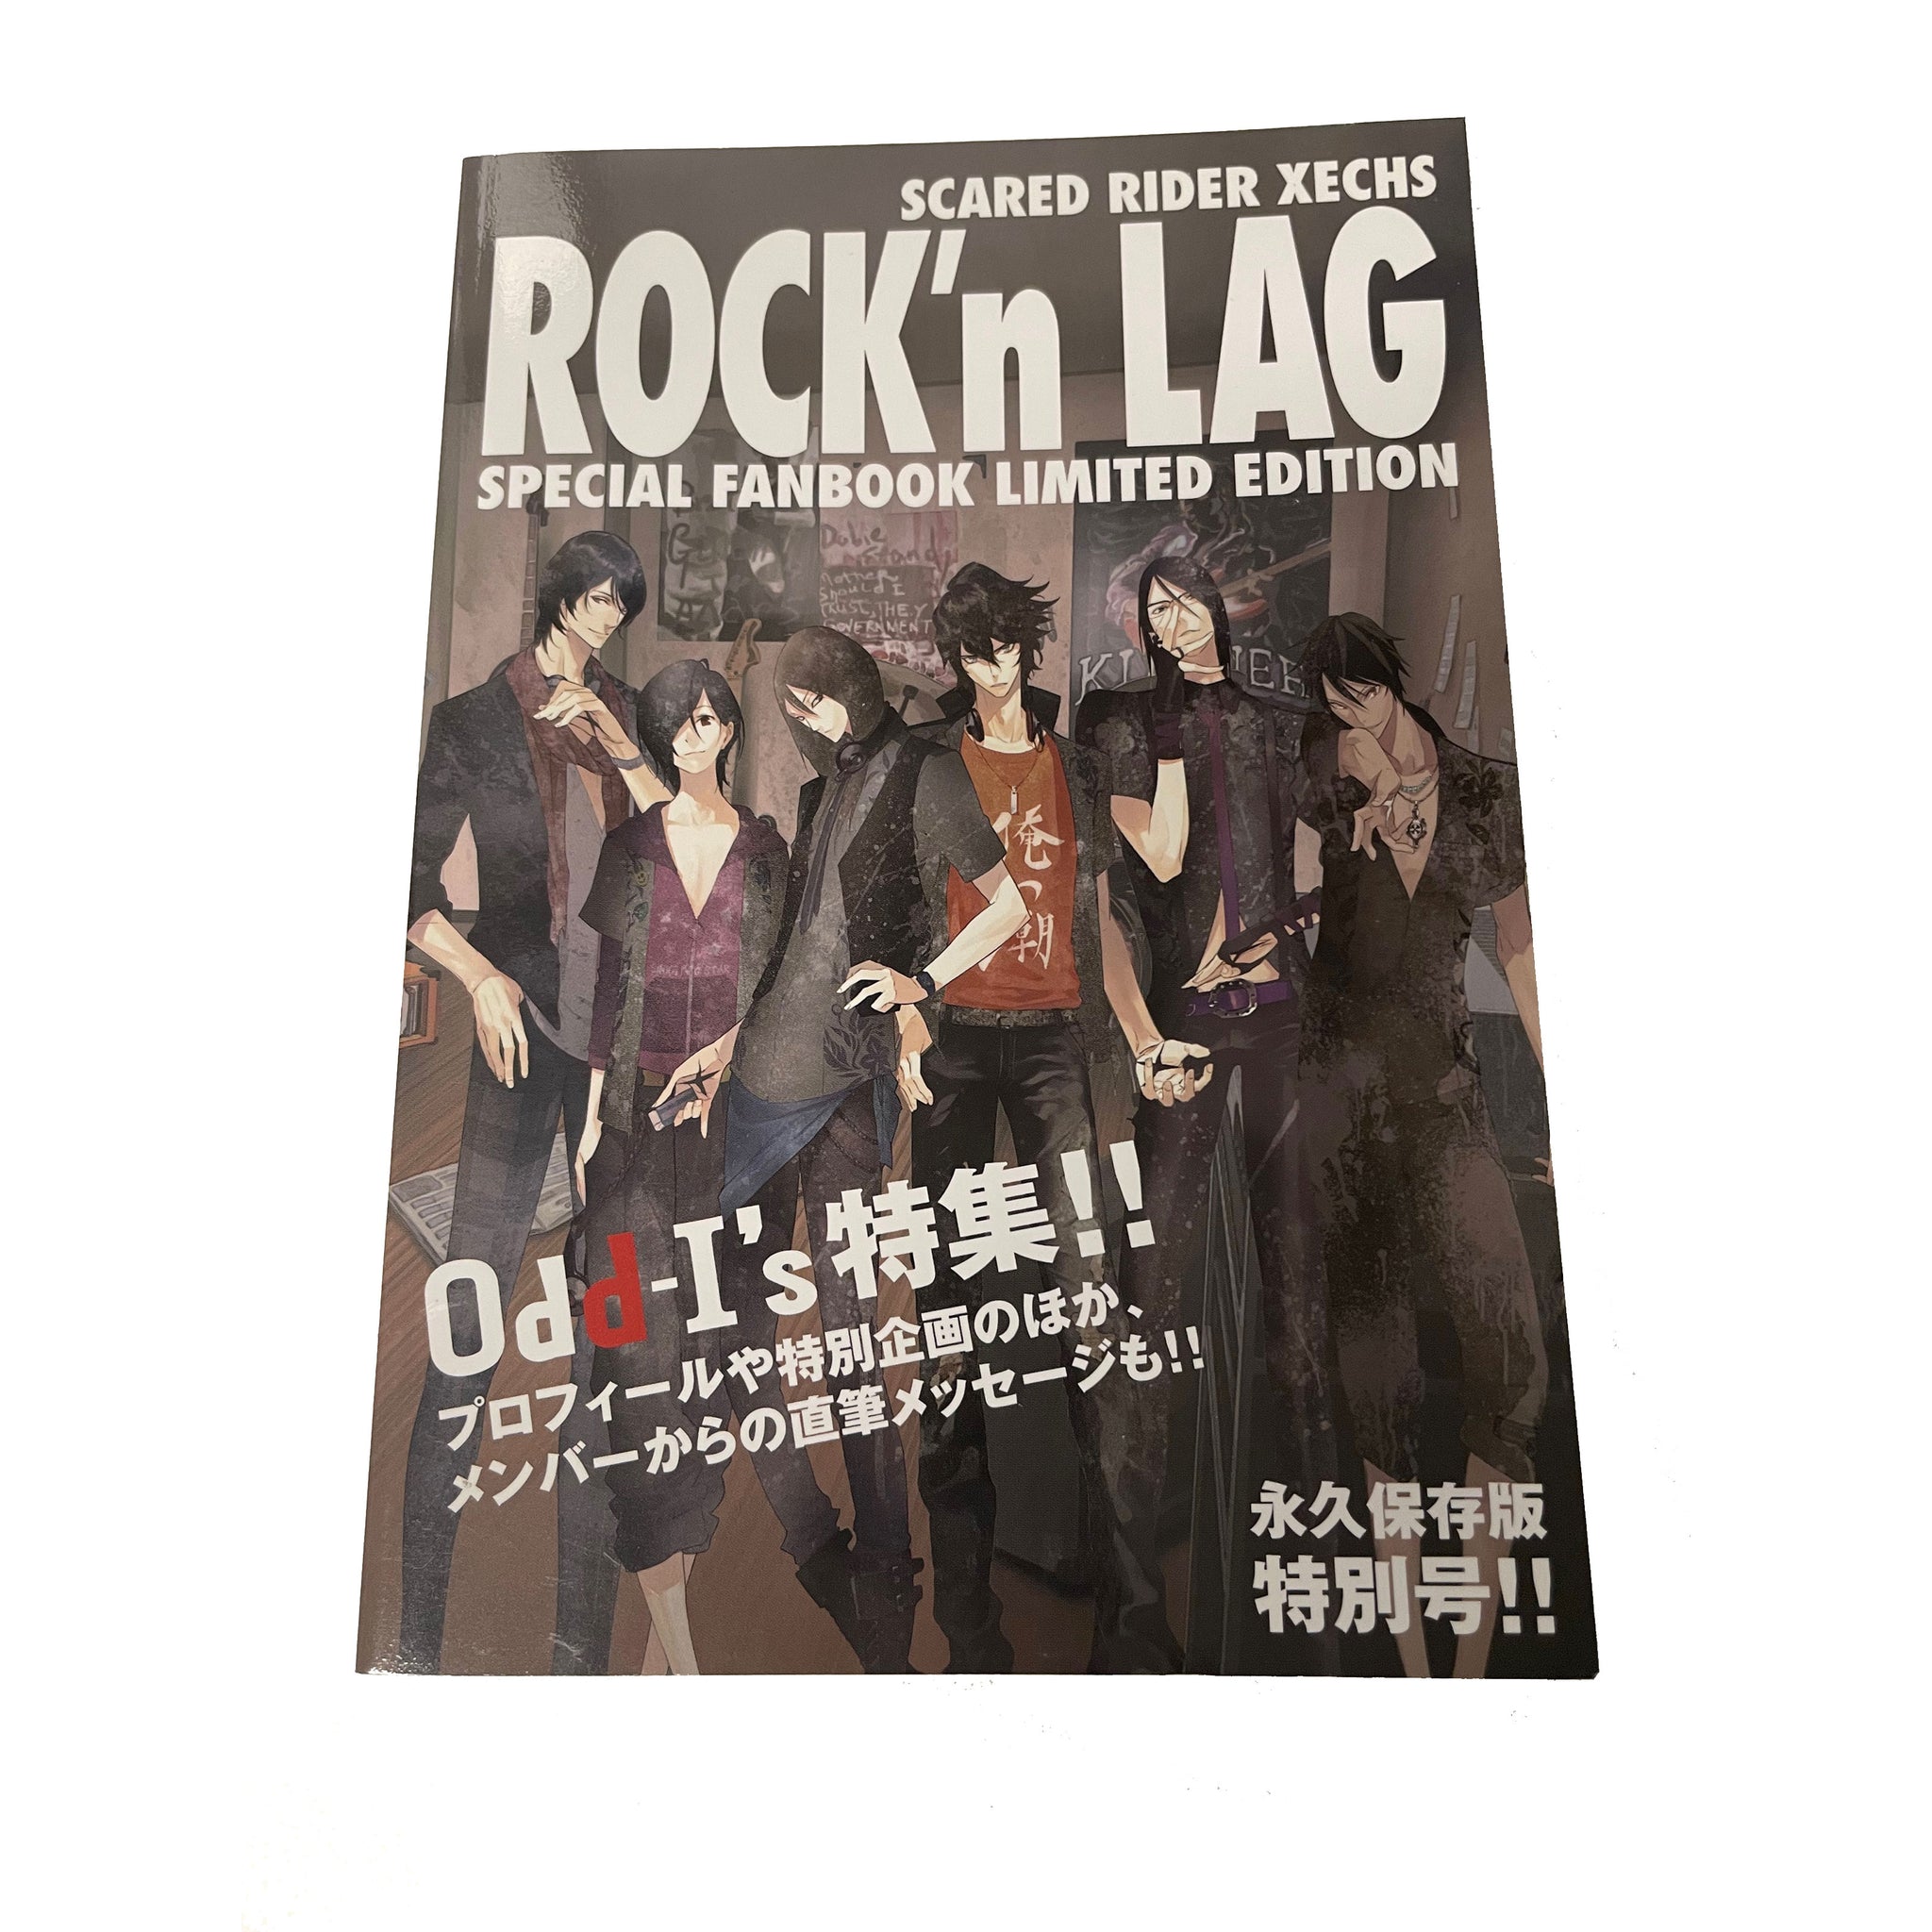 Rock'n LAG Scared Rider XECHS Fanbook + cd - Odd-i's Limited Edition Book Japan freeshipping - Retrofollie